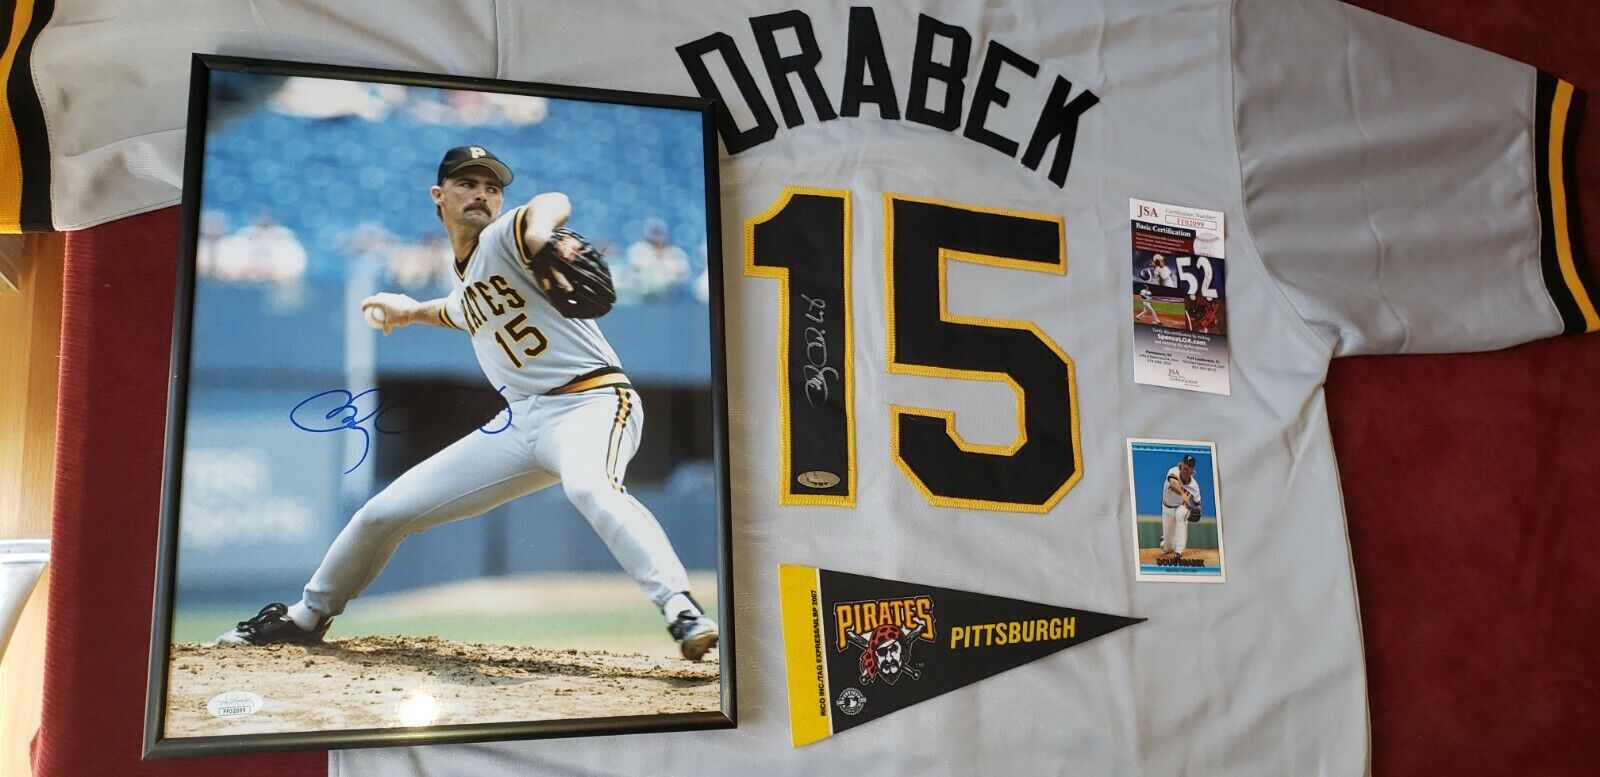 Doug Drabek LOT Signed Pittsburgh Pirates Jersey Framed 11x14 Trade Card Pennant Без бренда